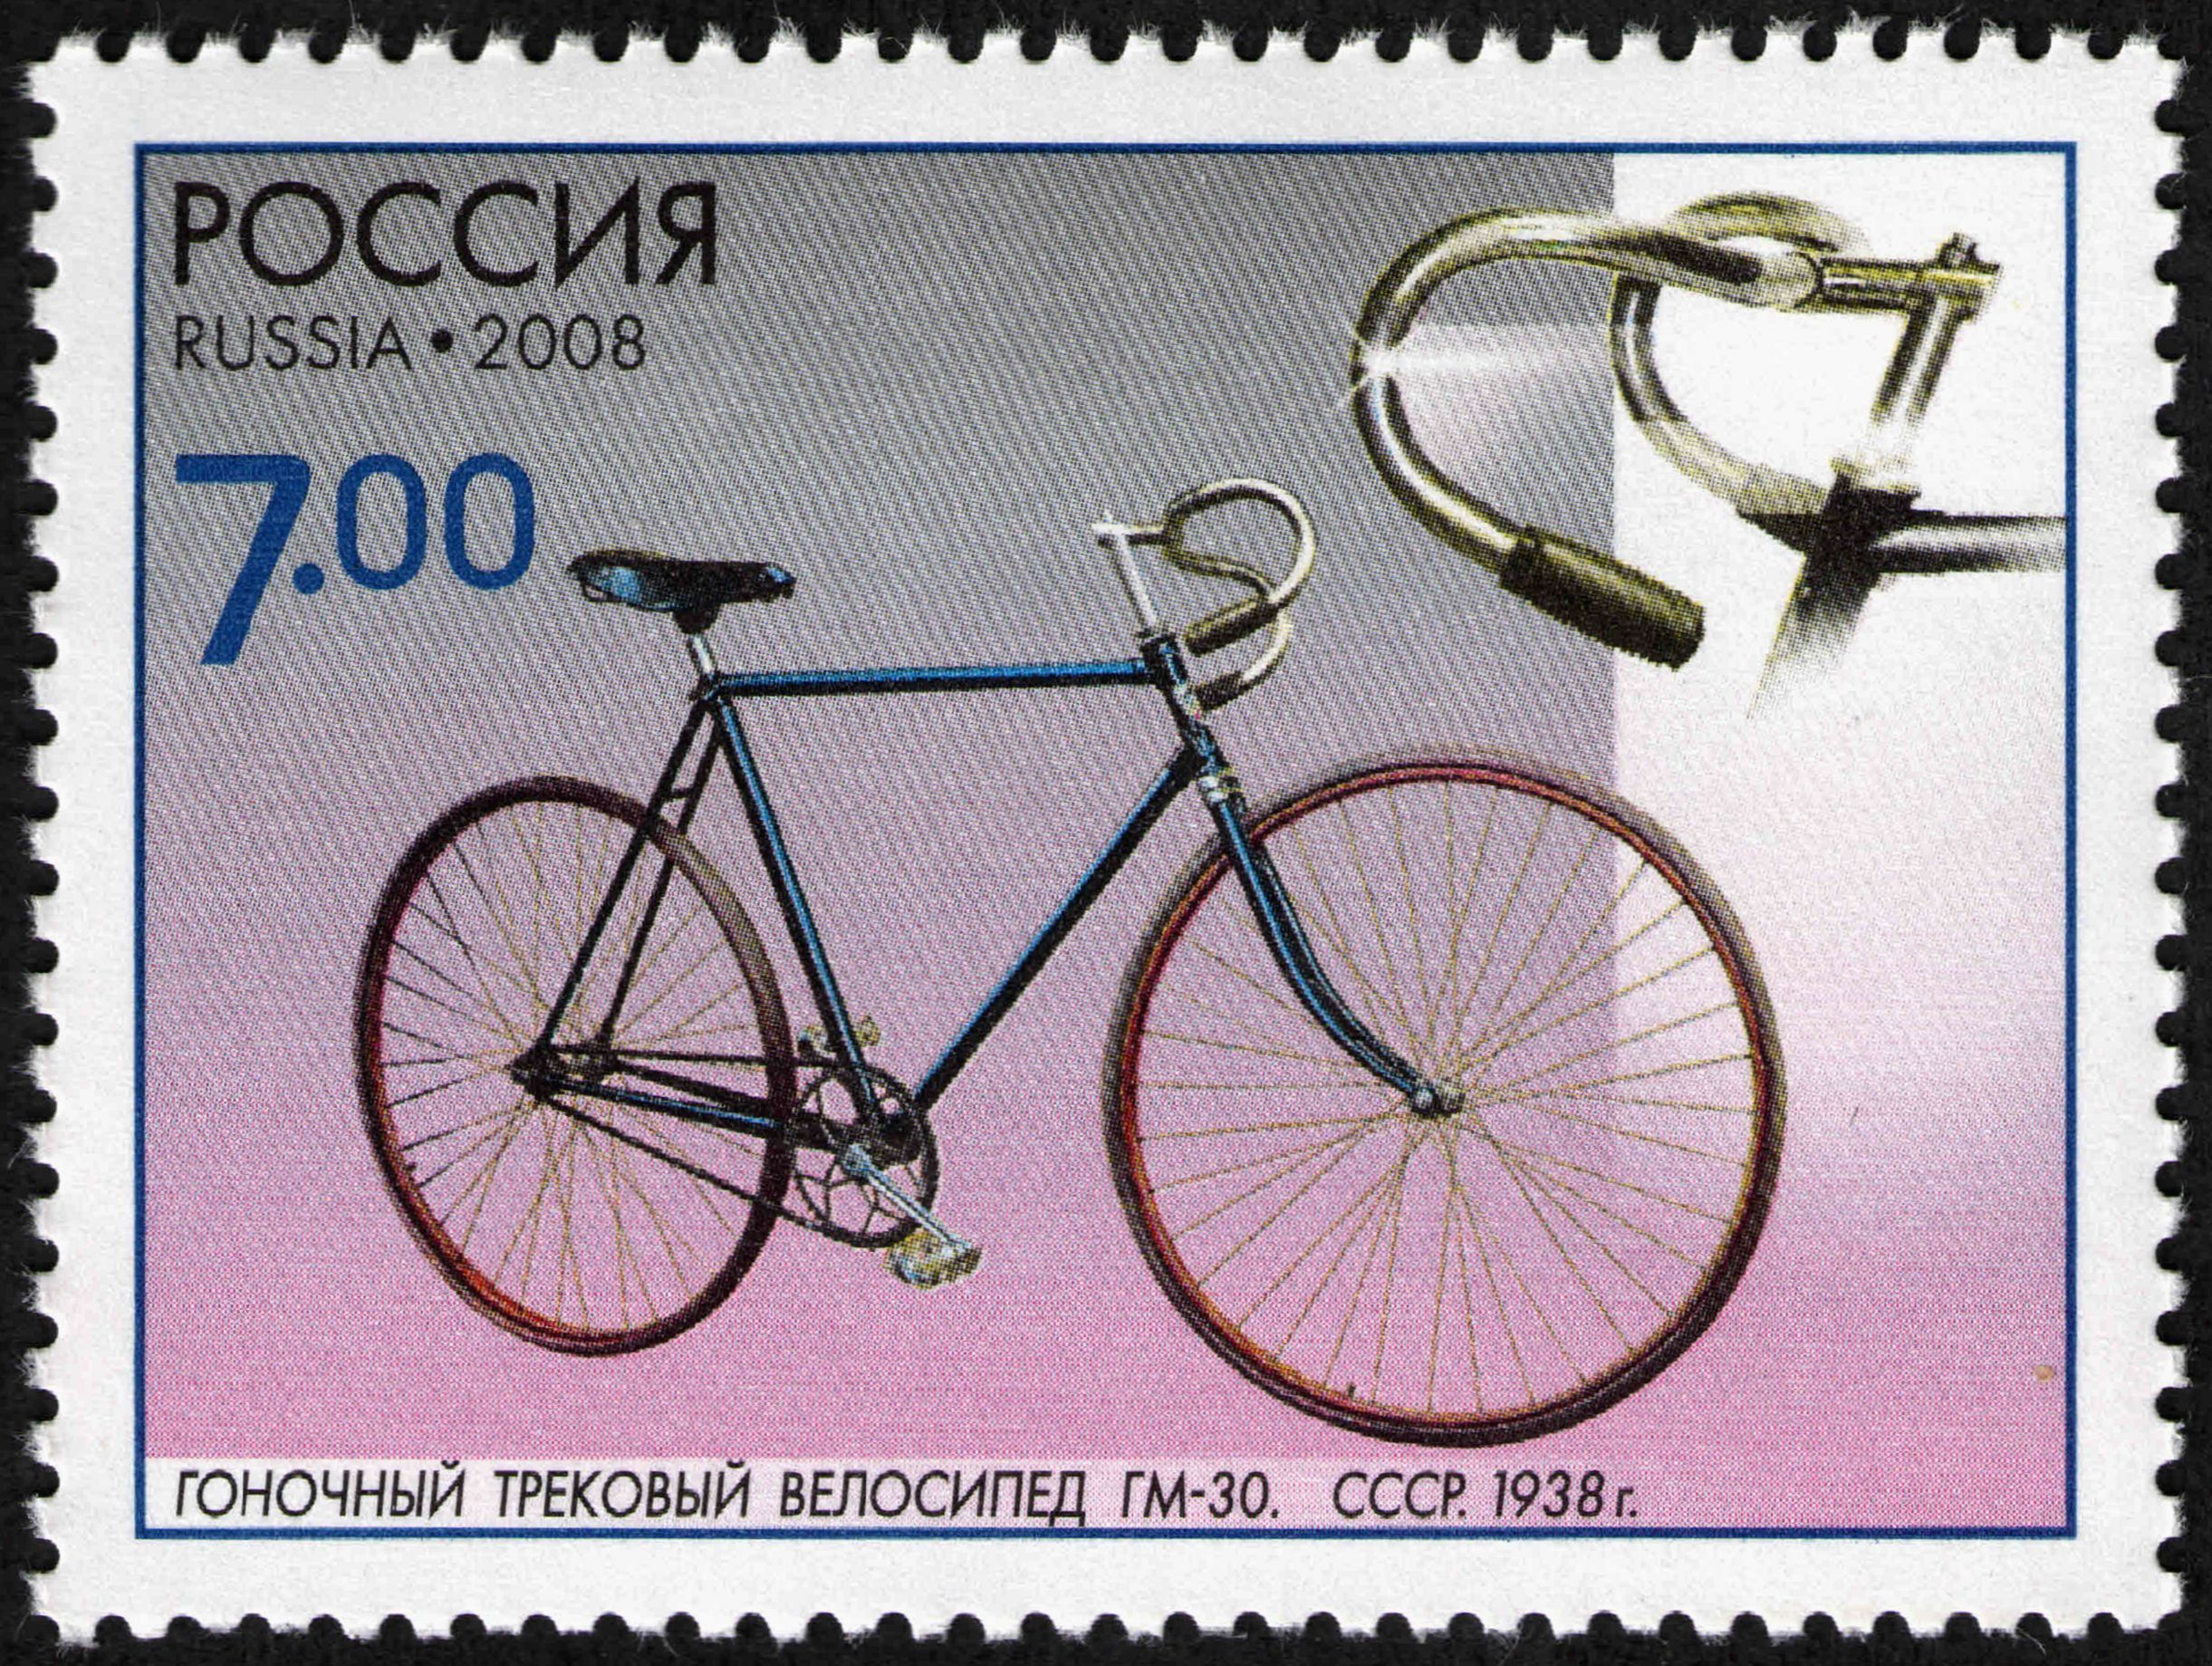 Stamp of Russia 2008 No 1287